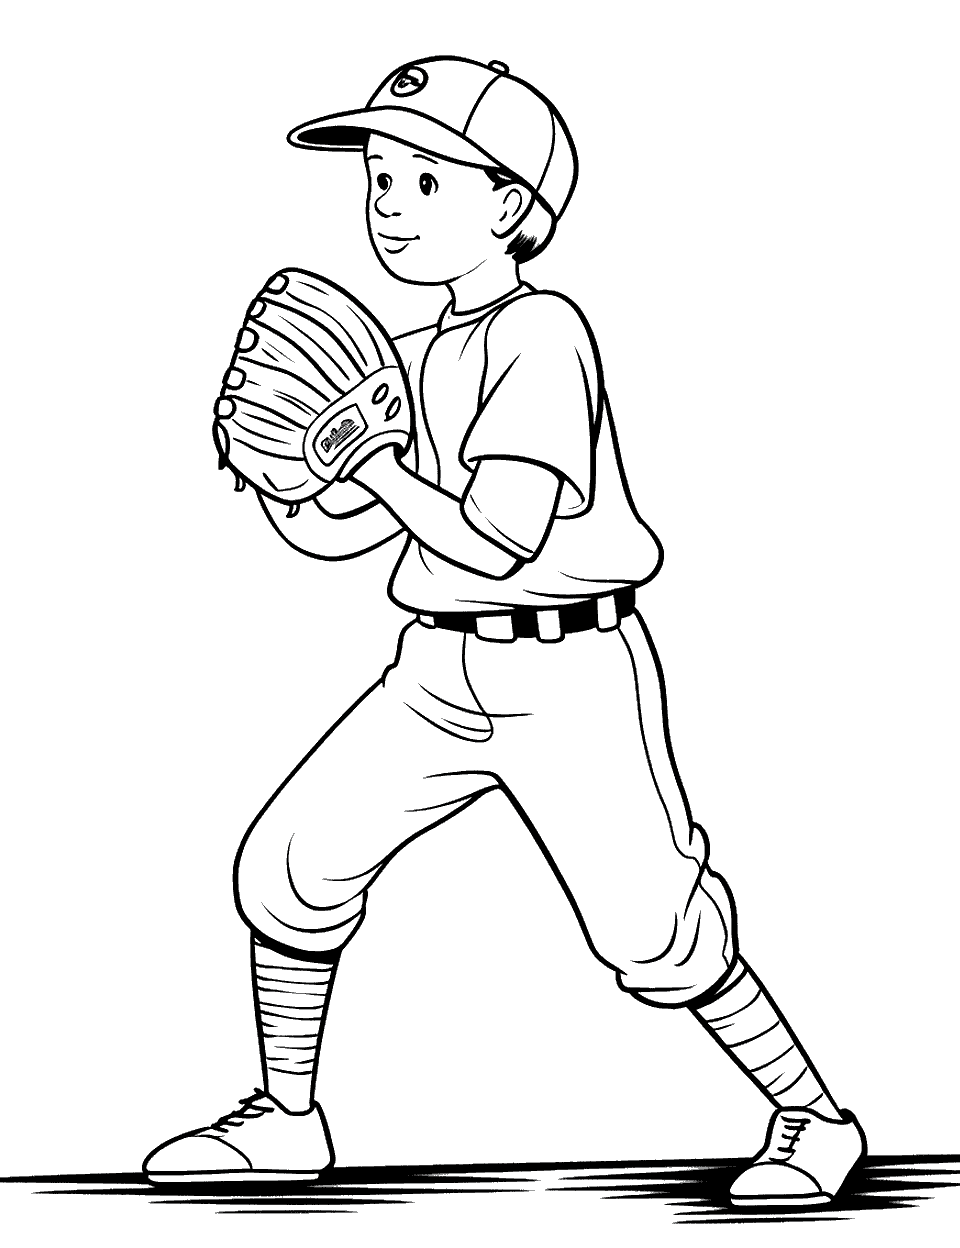 Focused Pitcher Baseball Coloring Page - A pitcher in mid-throw, concentrating intensely on the catcher’s mitt.